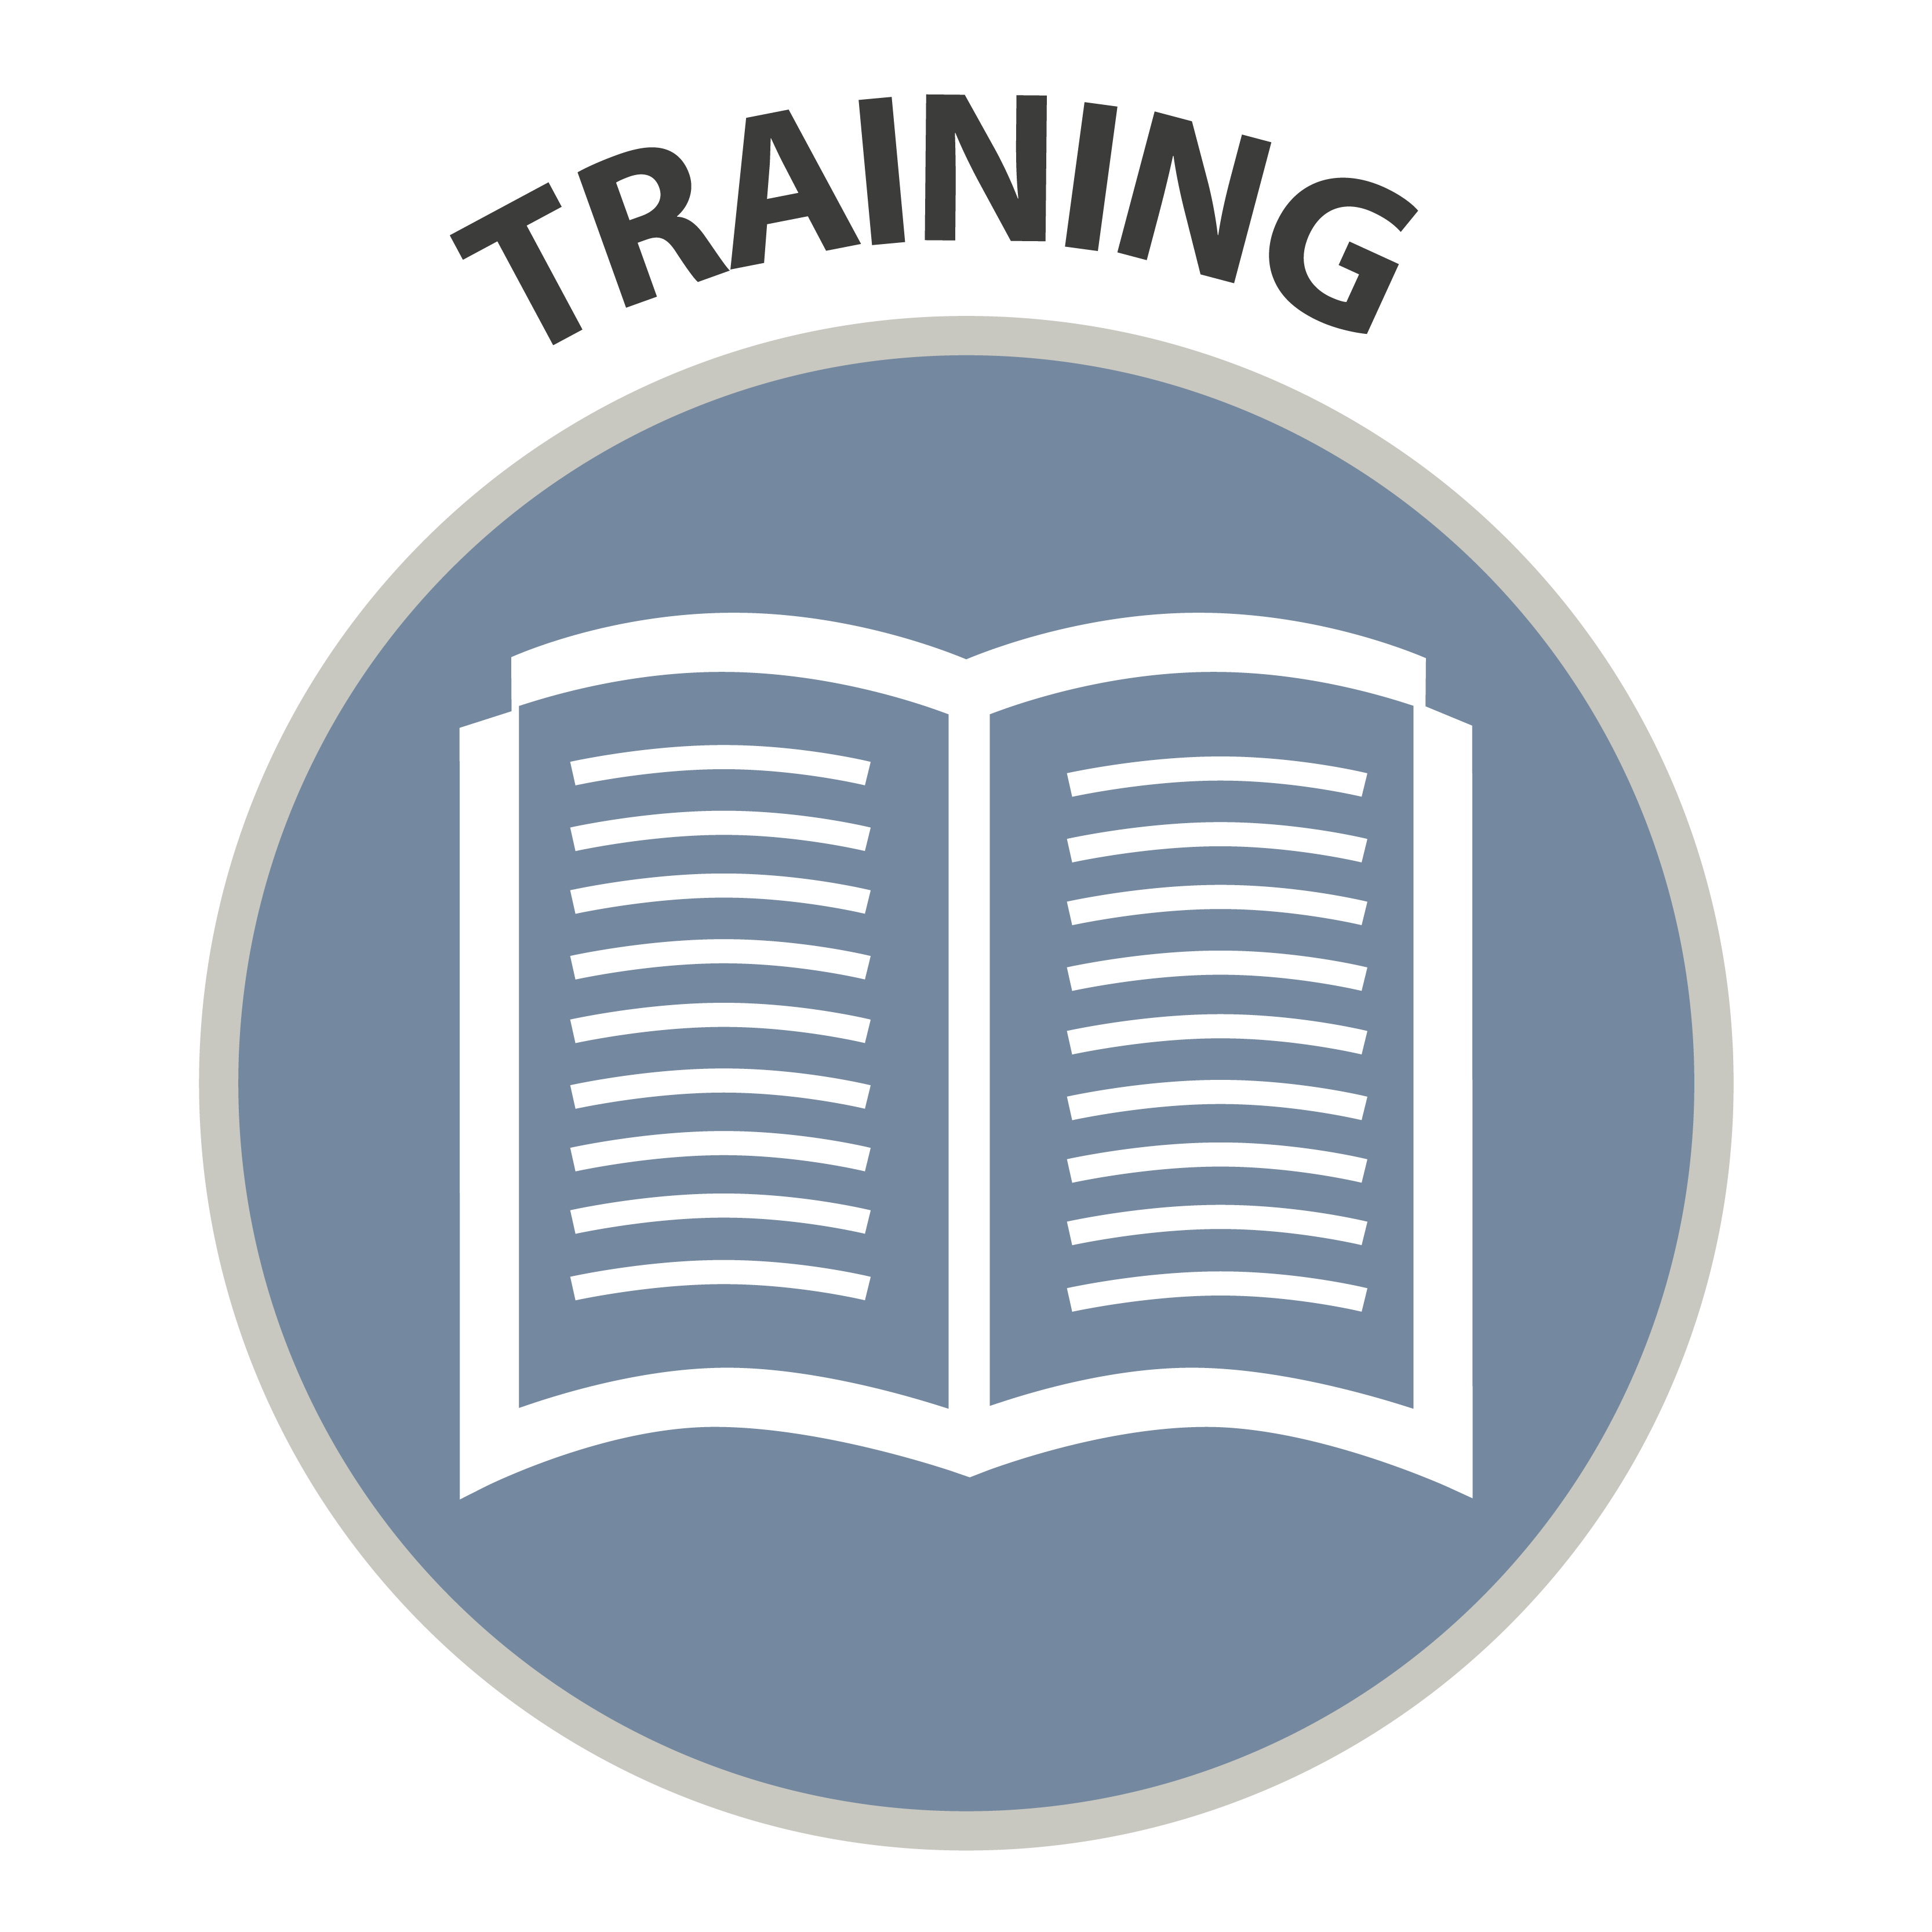 Training - icon of an open book